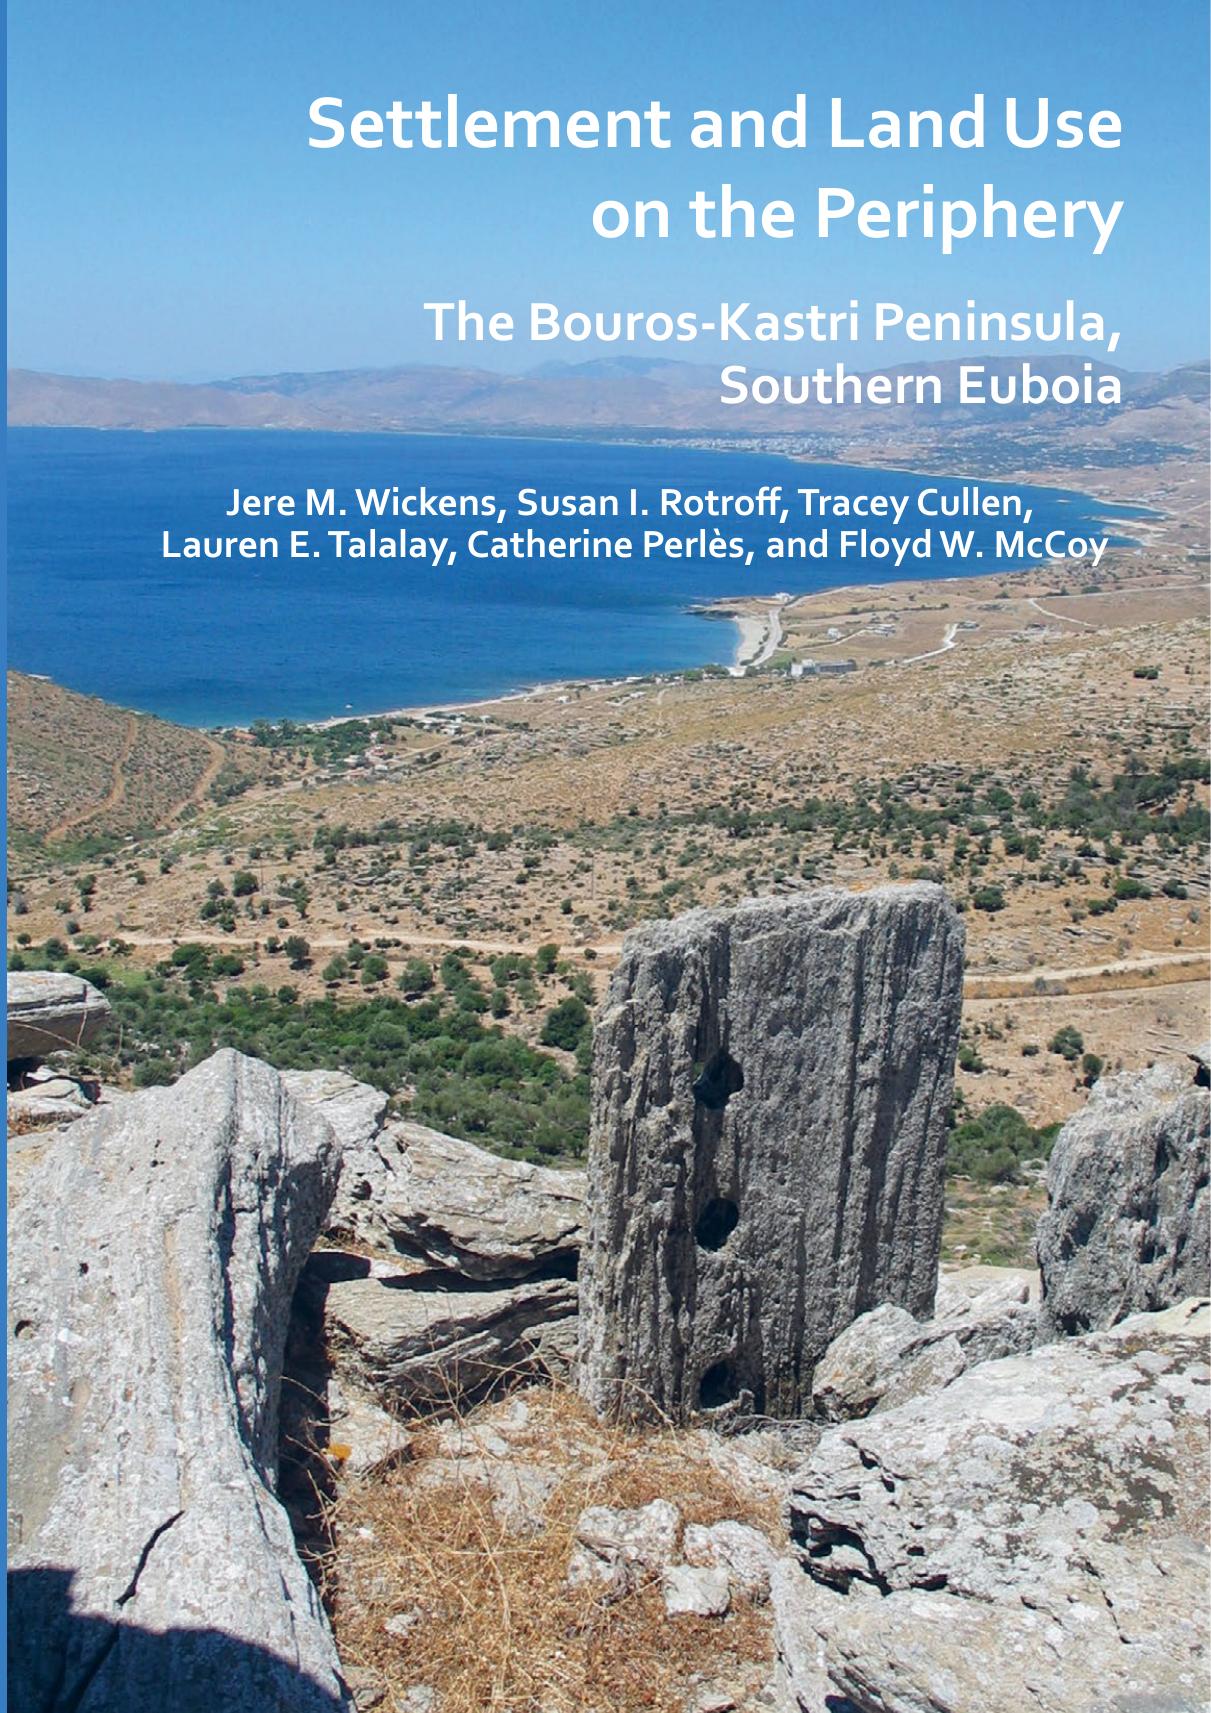 Settlement and Land Use on the Periphery: The Bouros-Kastri Peninsula, Southern Euboia by Jere M. Wickens; Susan I. Rotroff; Tracey Cullen; Lauren E. Talalay; Catherine Perlès